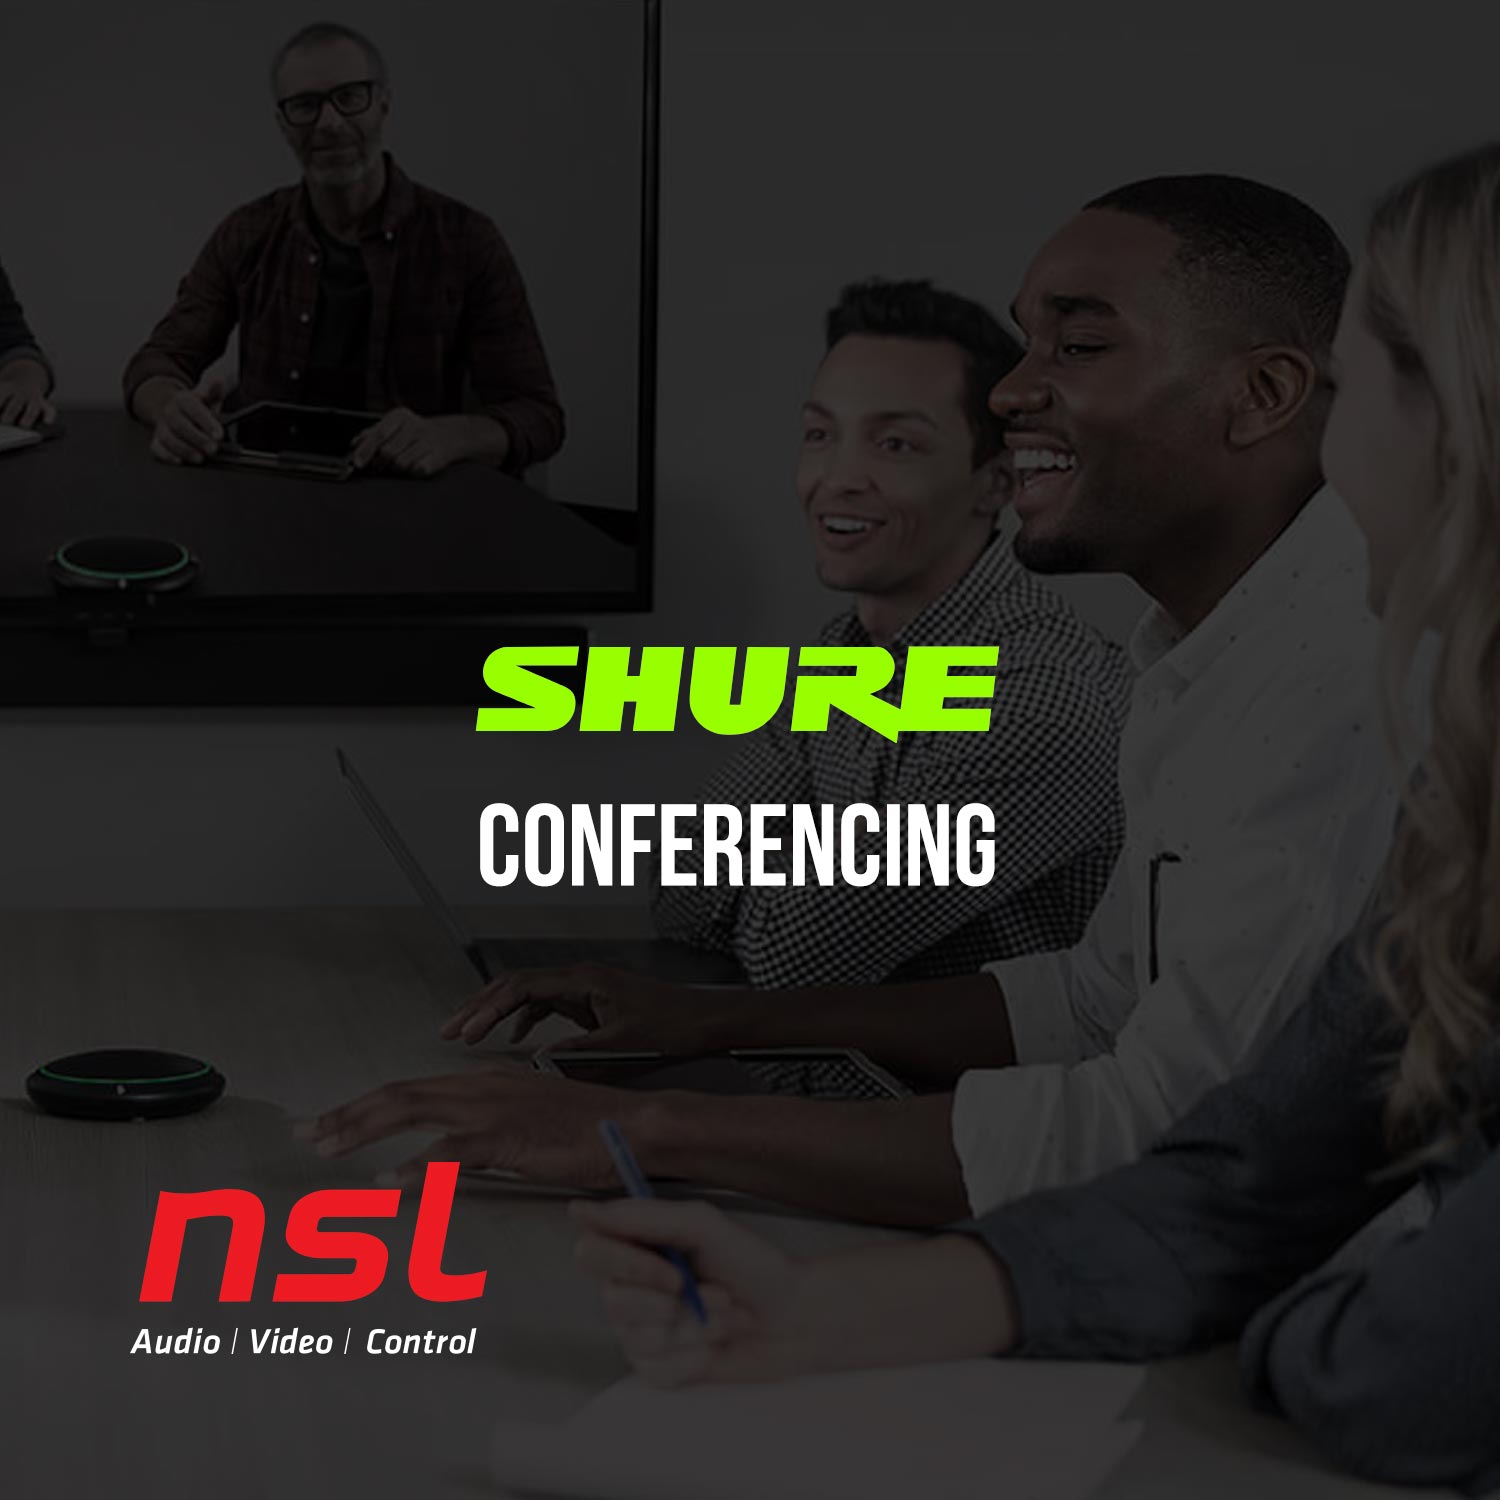 shure-conference-training-courses